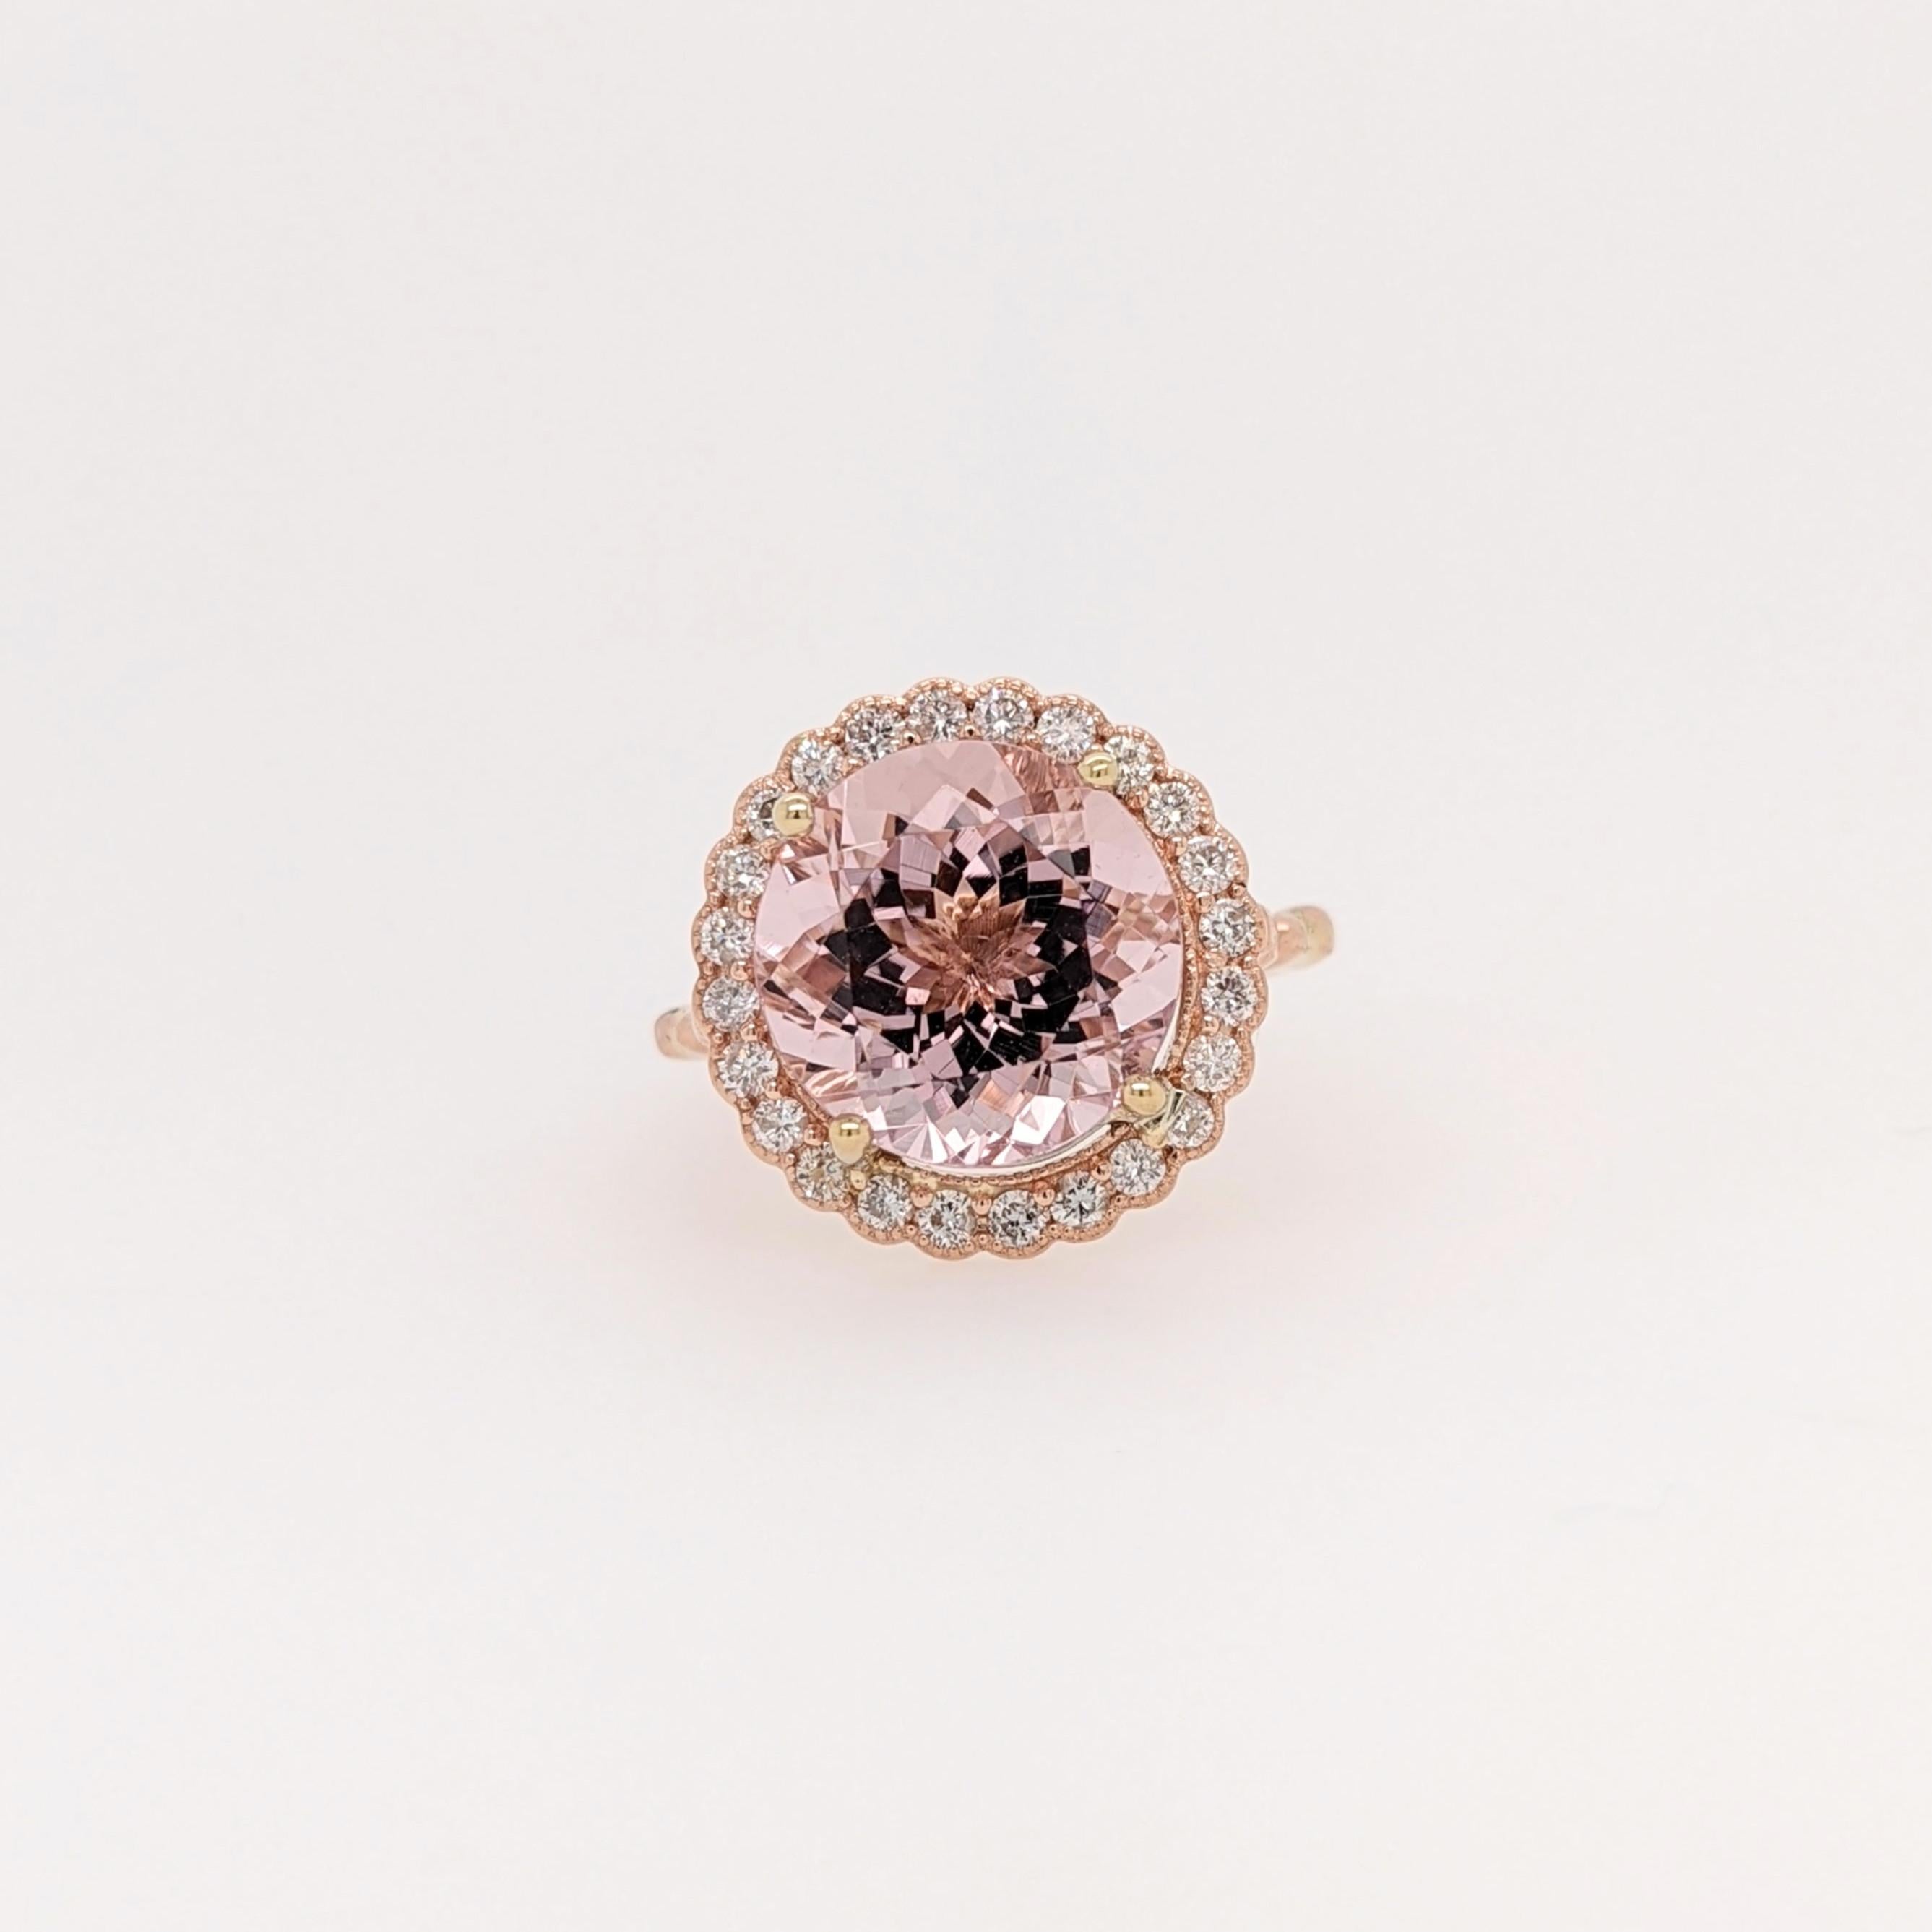 Introducing a show-stopping statement ring featuring a mesmerizing 5 carat Morganite centerpiece, perfectly accented with all-natural diamond accents. This exquisite ring speaks volumes of elegance and allure, destined to capture hearts and make a